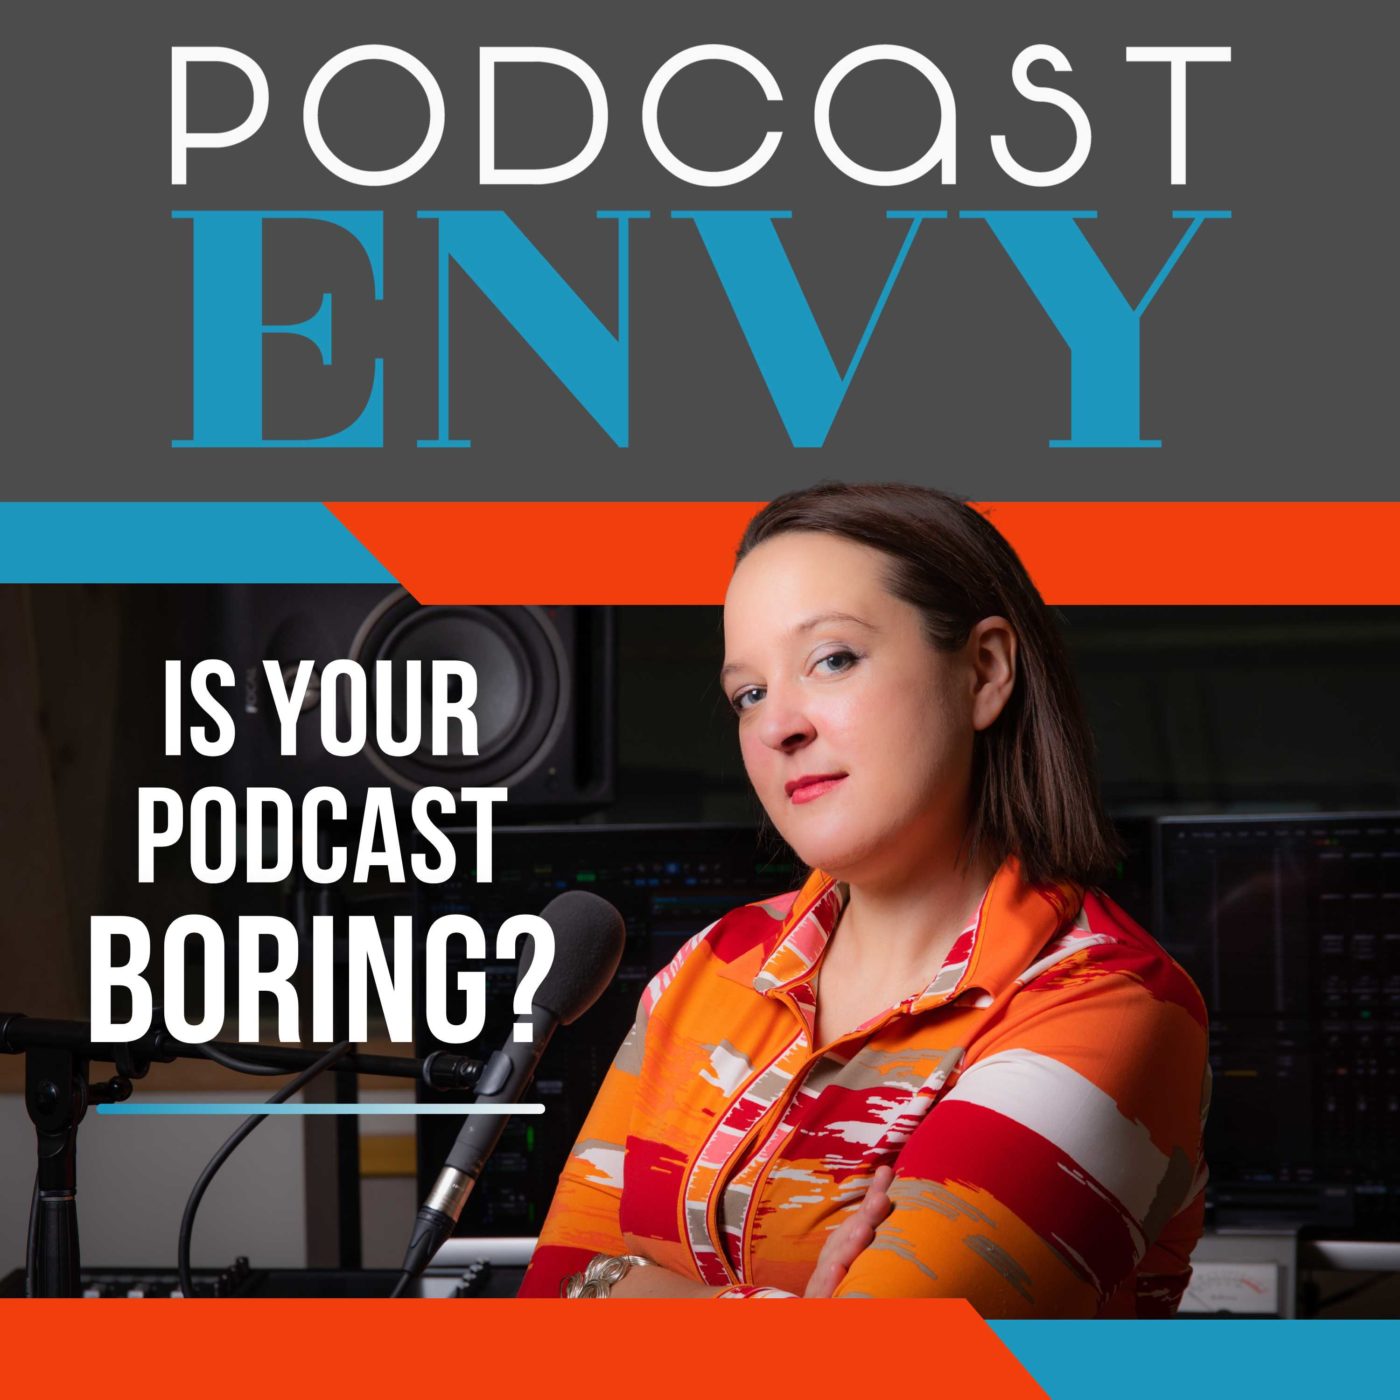 Is Your Podcast Boring? (Here’s how to fix it!)